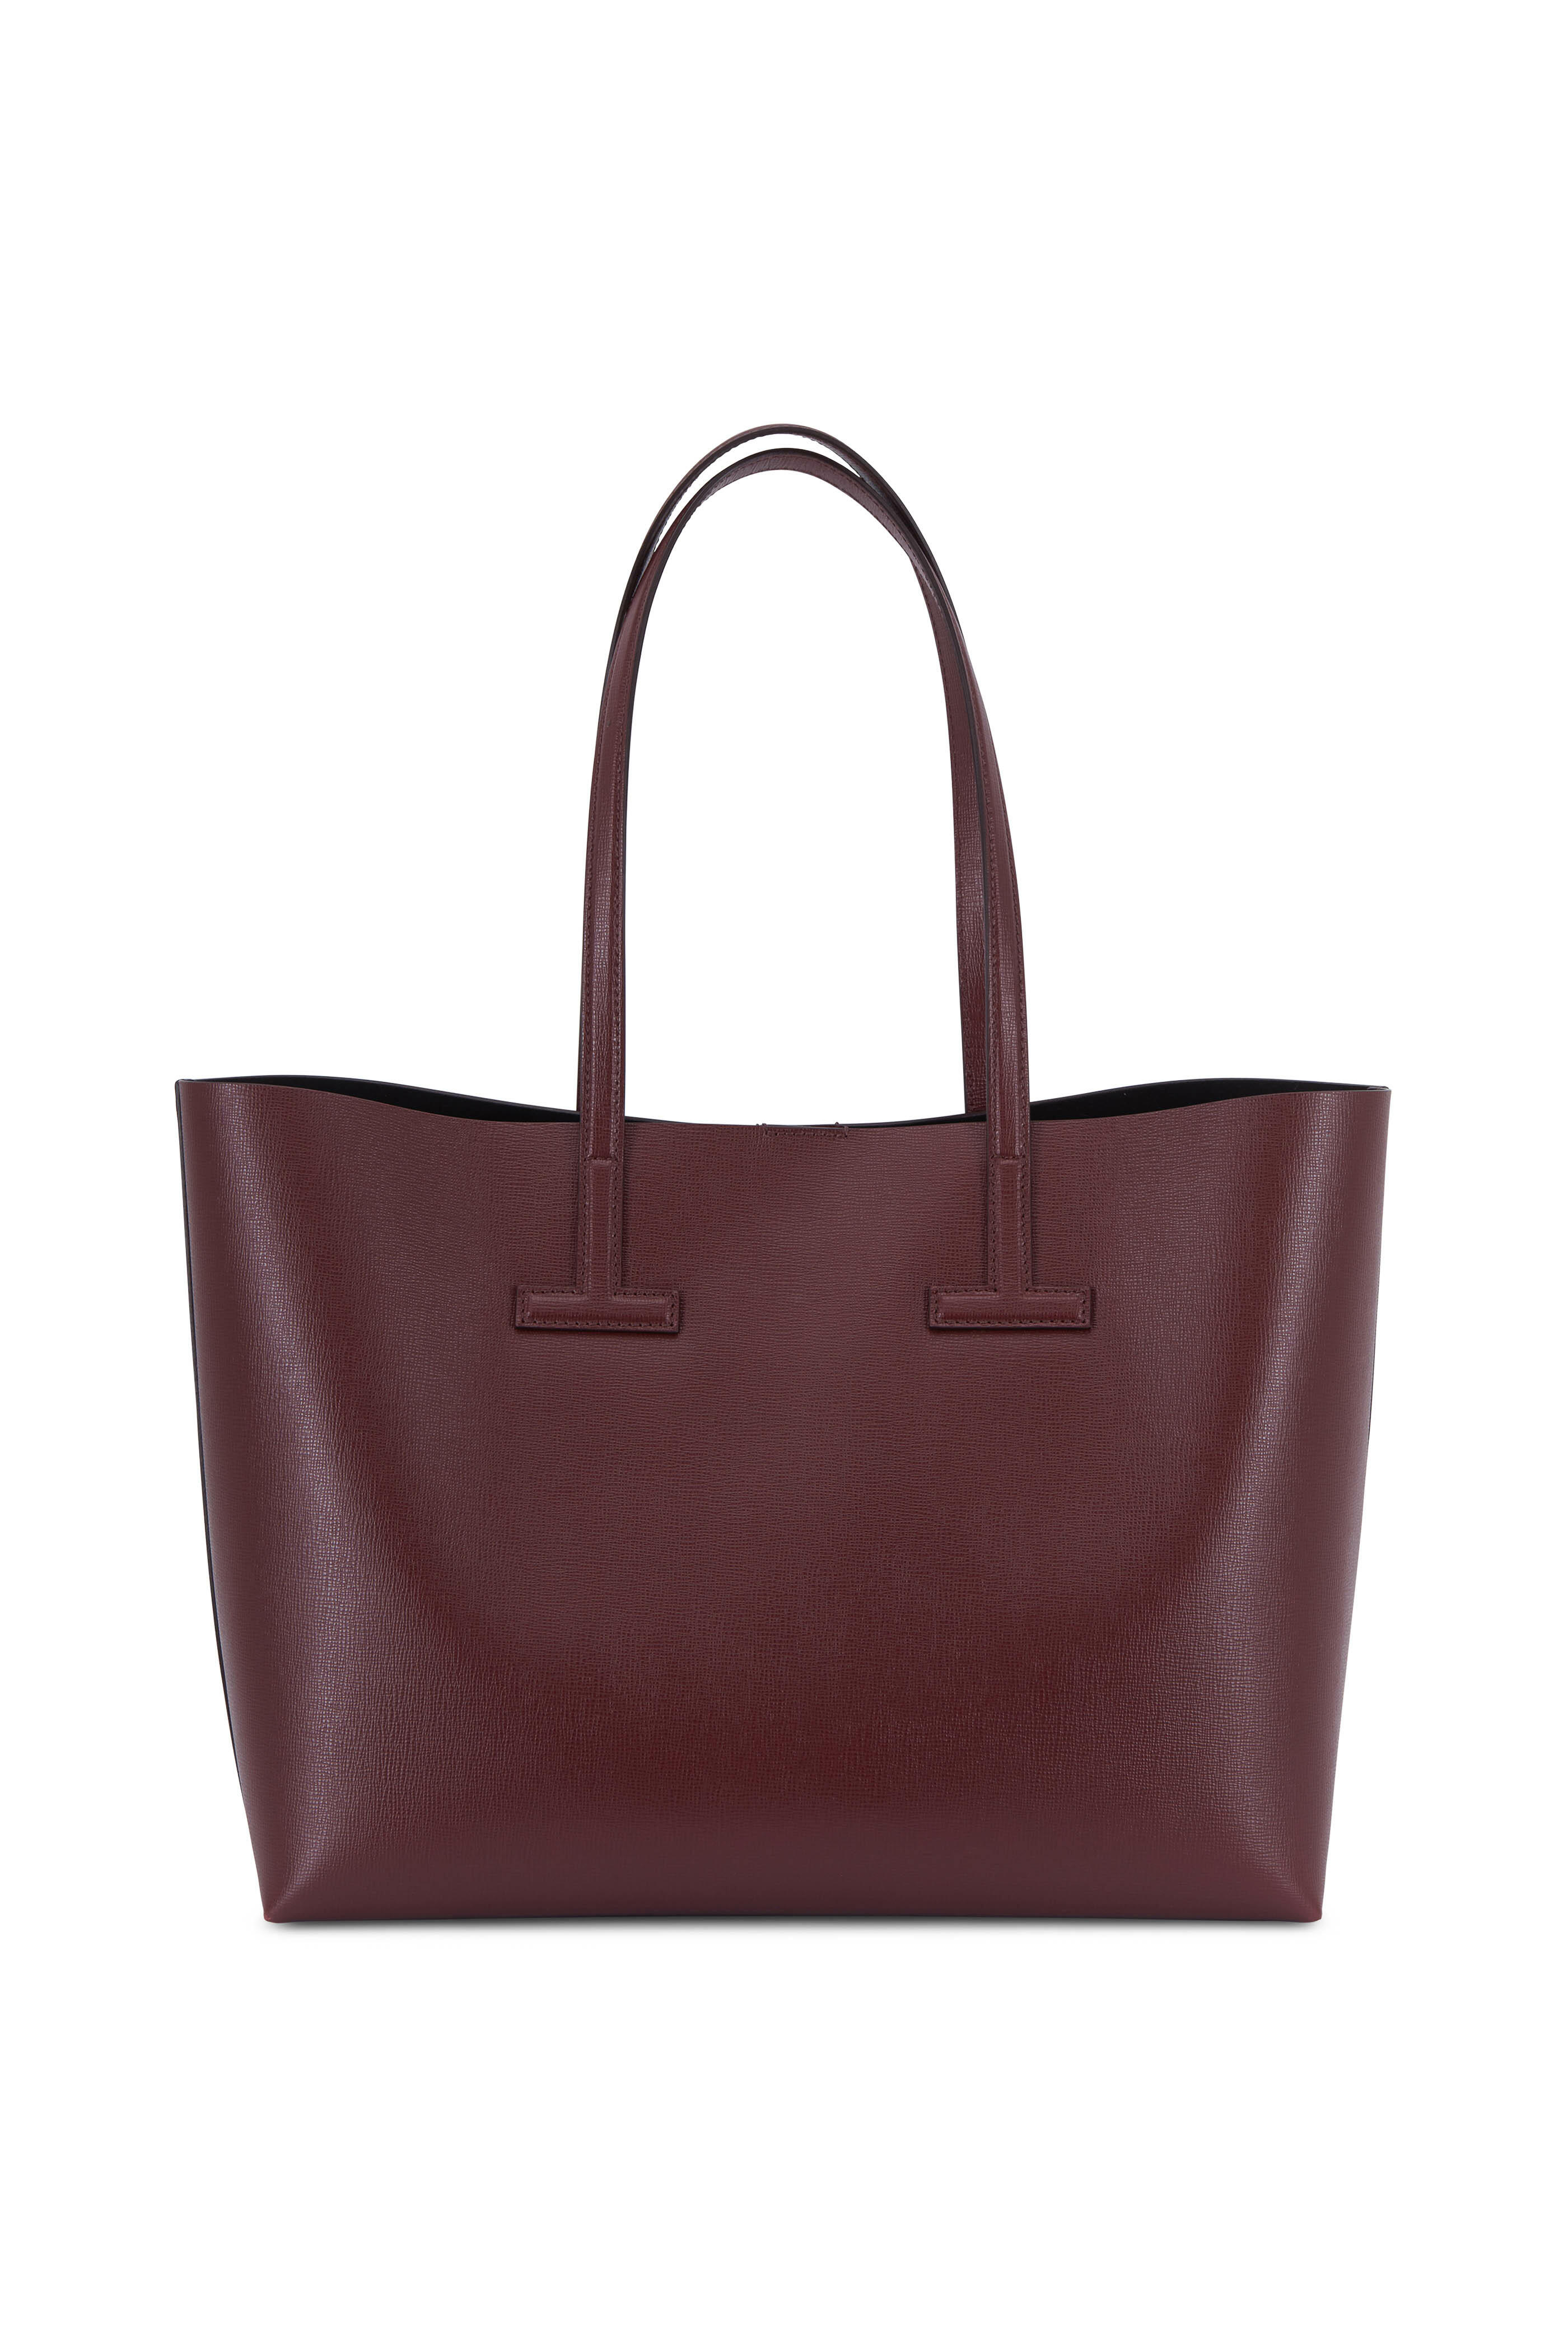 Tom Ford Saffiano Leather Large T Tote Bag